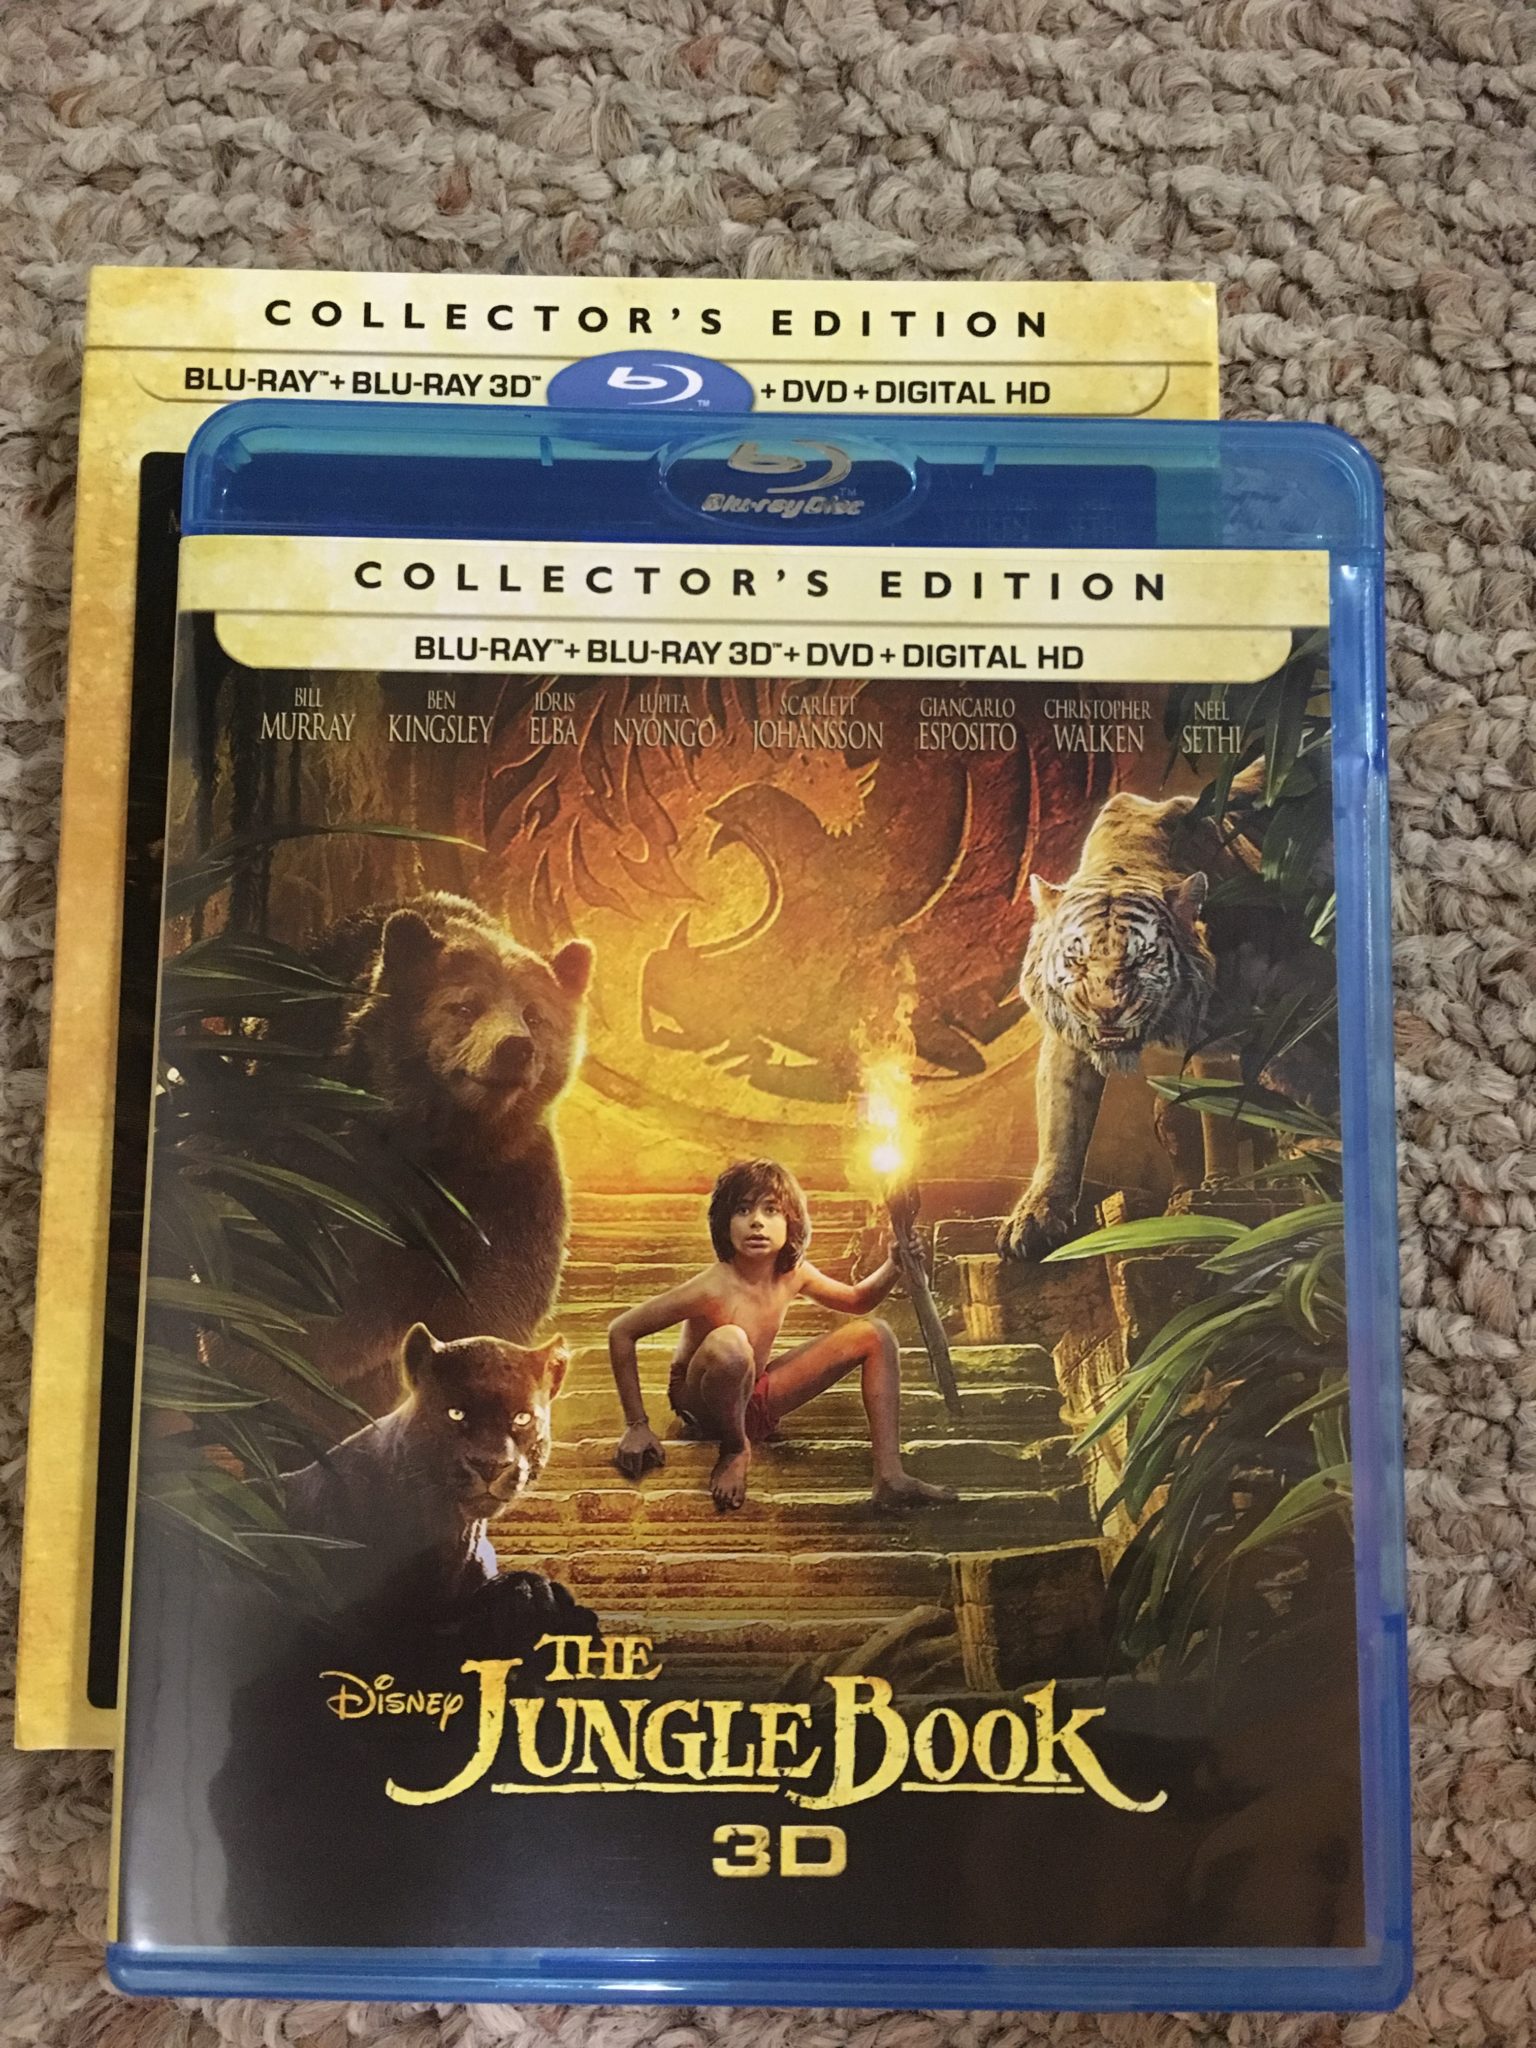 Collector Edition “Jungle Book” Review